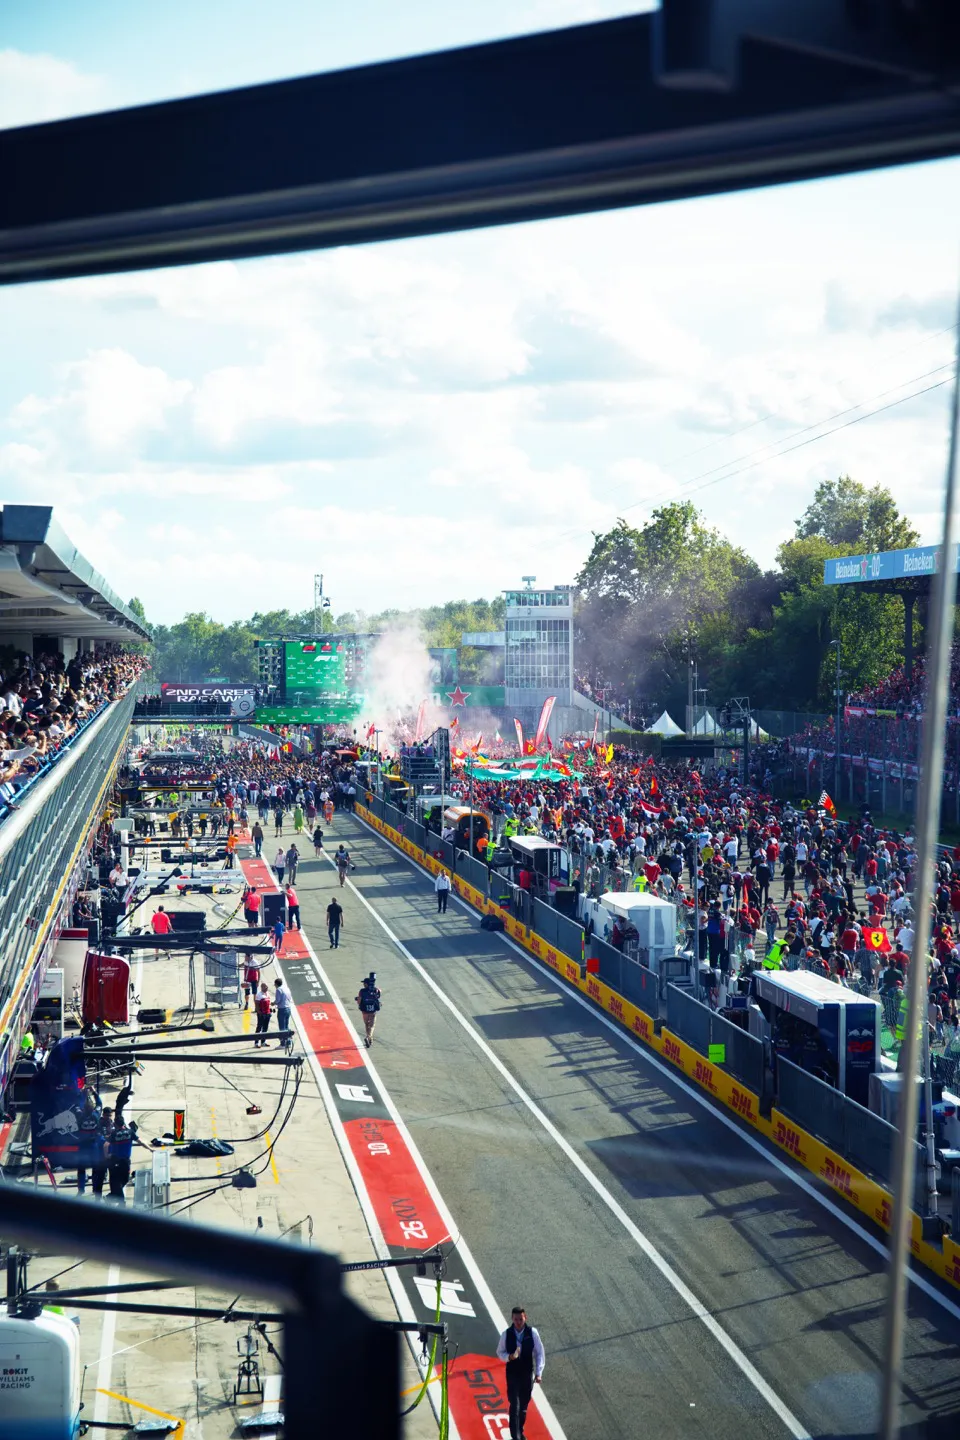 Watch the passion and excitement of Ferrari fans in Monza at the F1 Italian Grand Prix